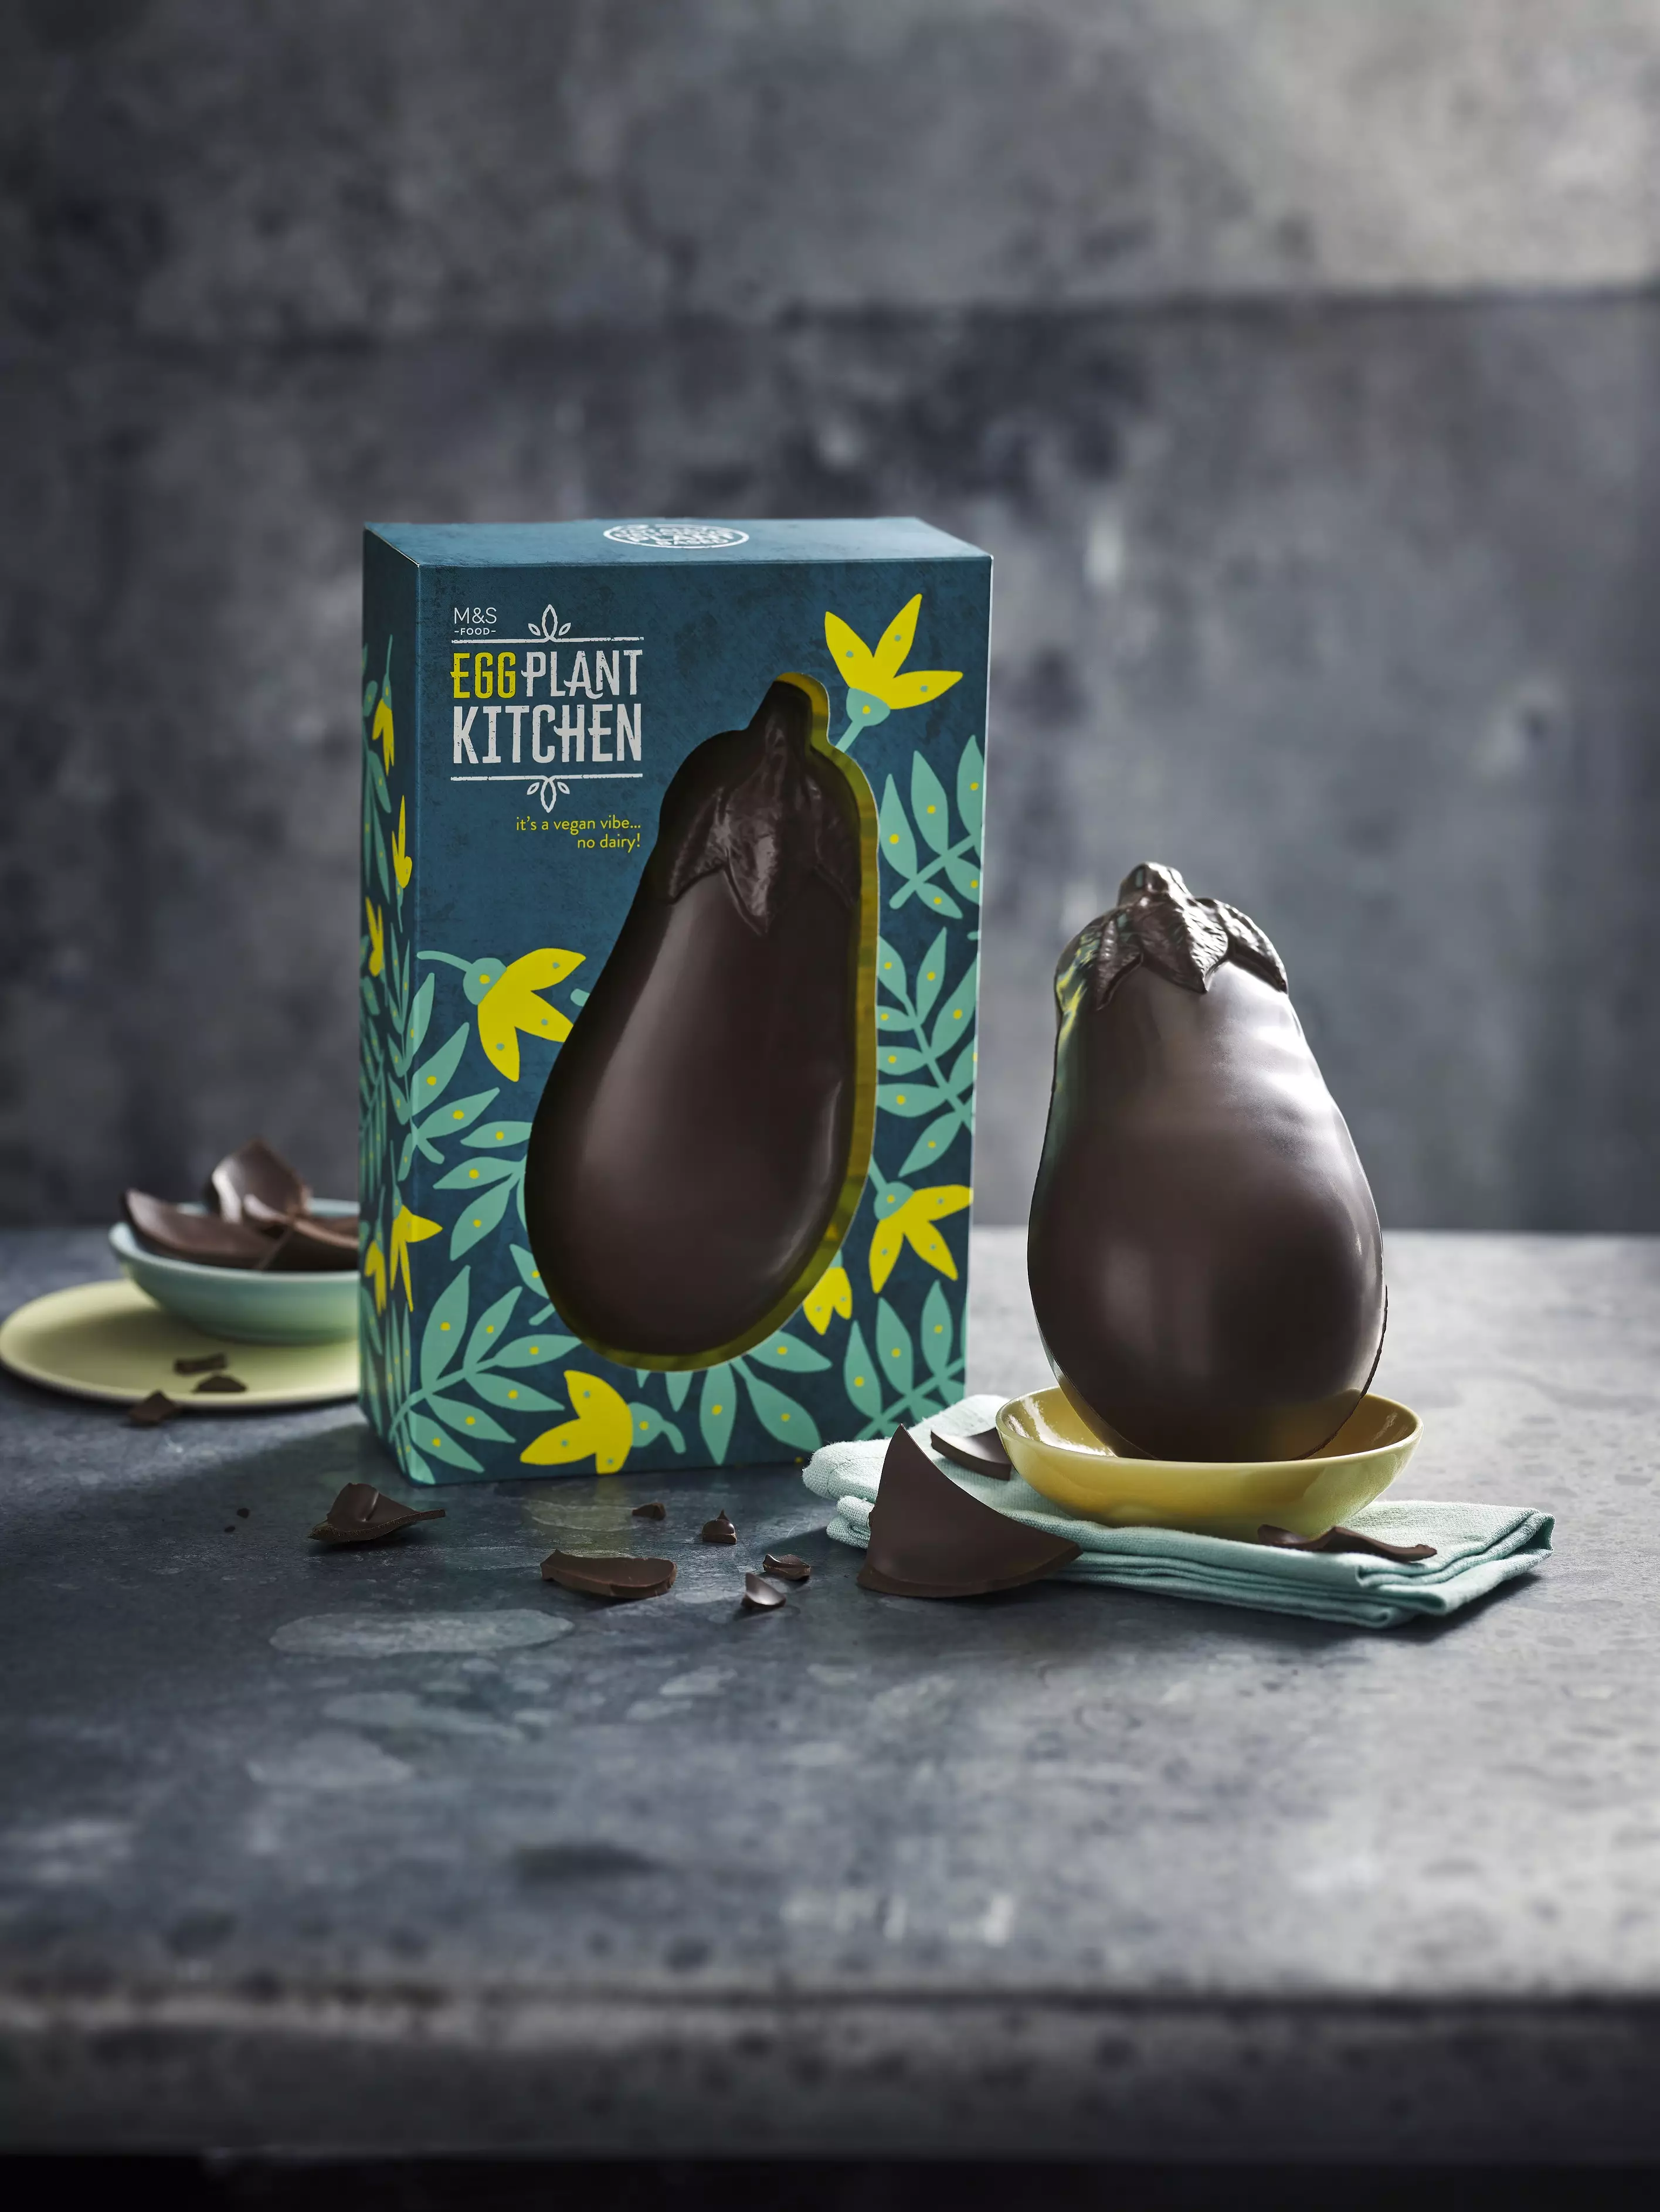 The egg features thick, dairy free chocolate, crafted into a cheeky aubergine shape (